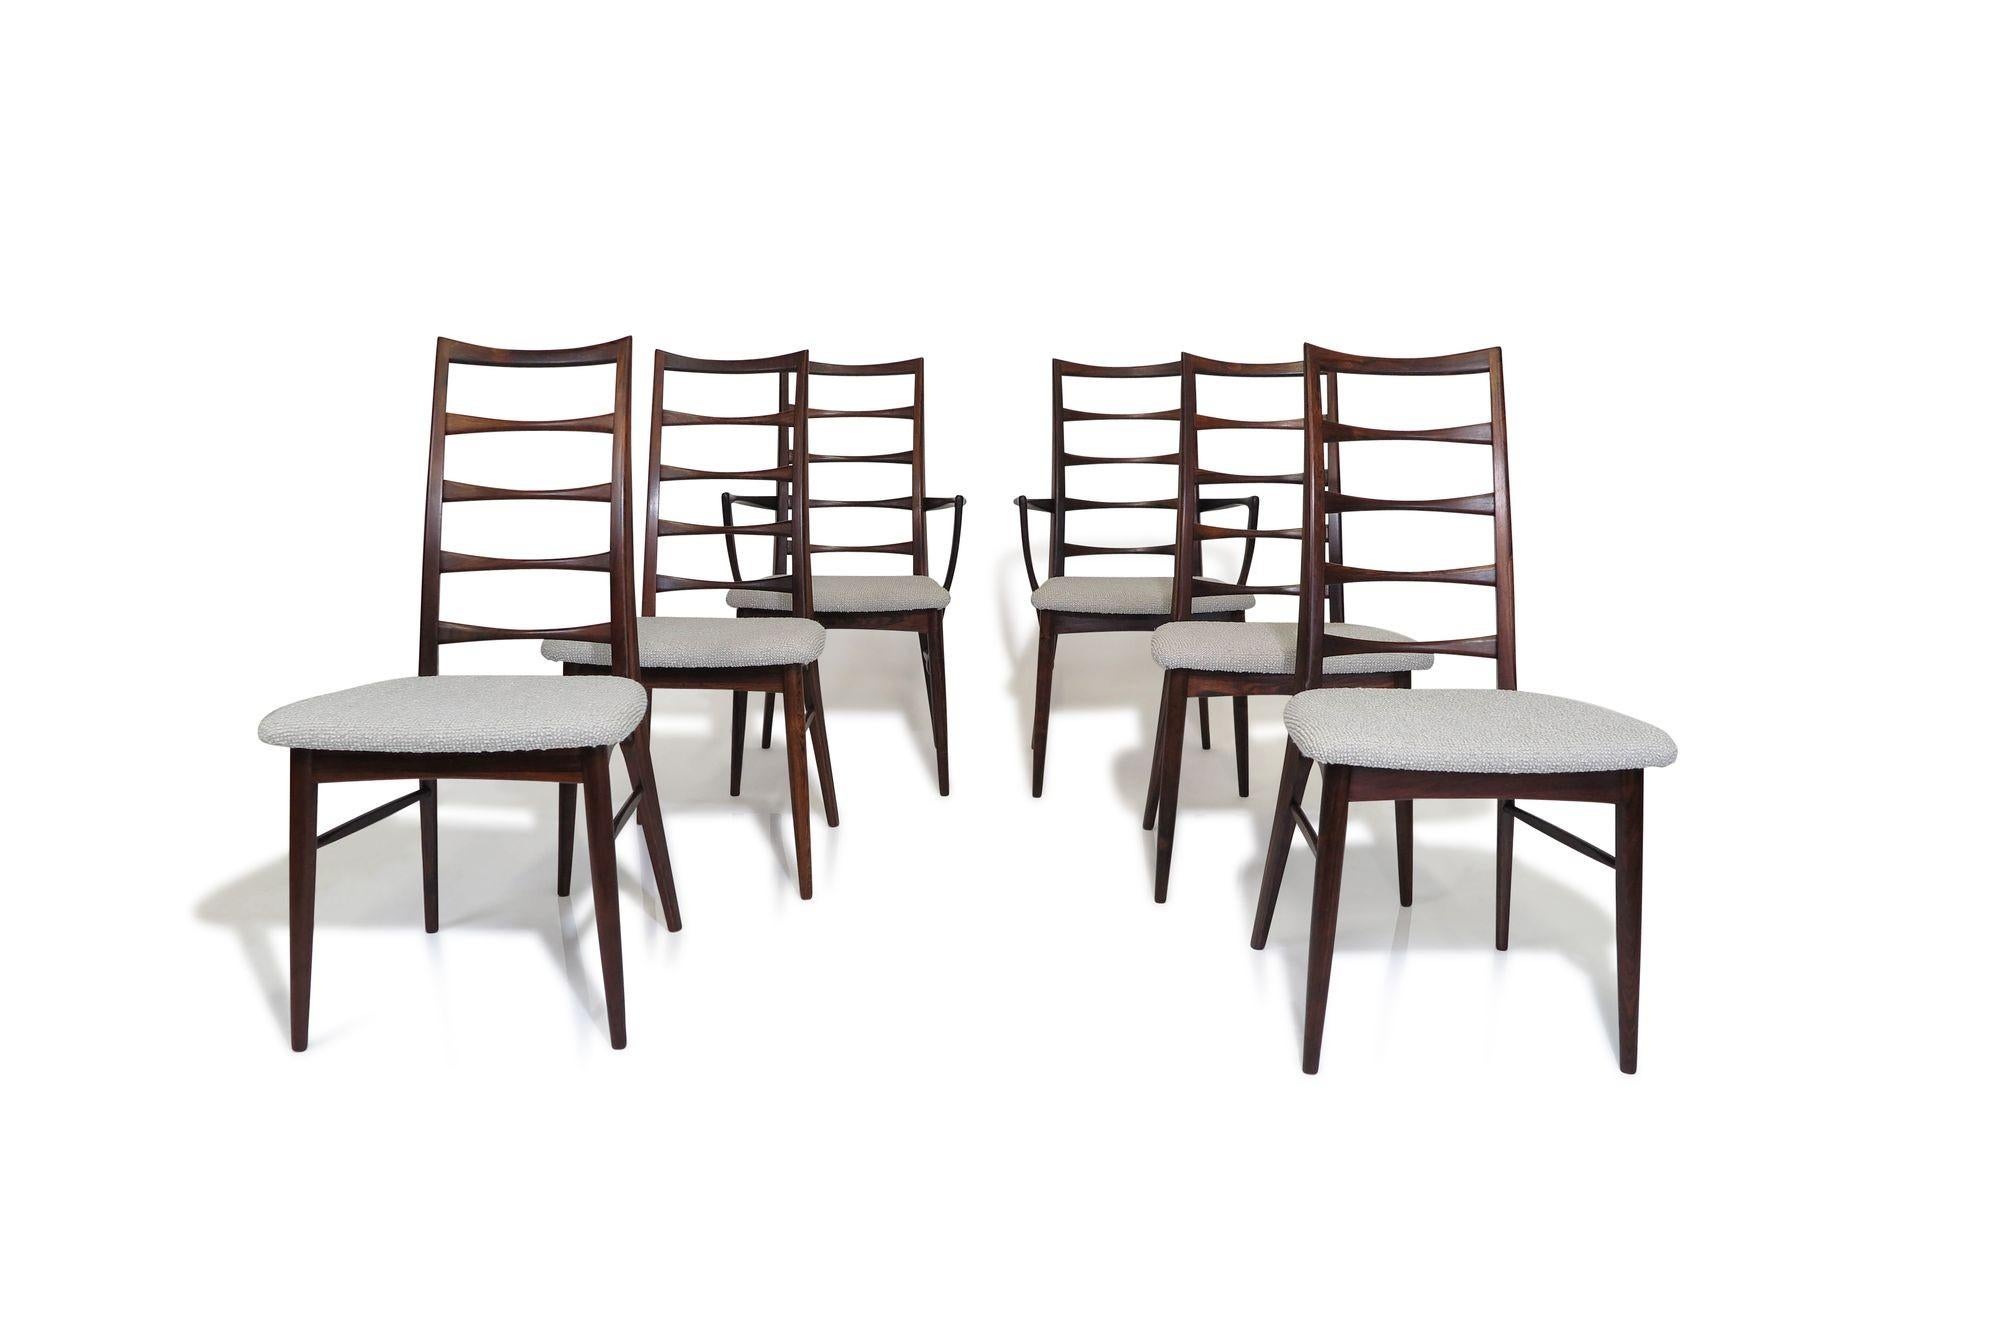 Set of six rosewood dining chairs designed by Niels Koefoed for Koefoeds Hornslet, model Lis, Denmark. The chairs are crafted of solid Brazilian rosewood with sculpted details and fine joinery. The set includes four side chairs and two arm chairs.